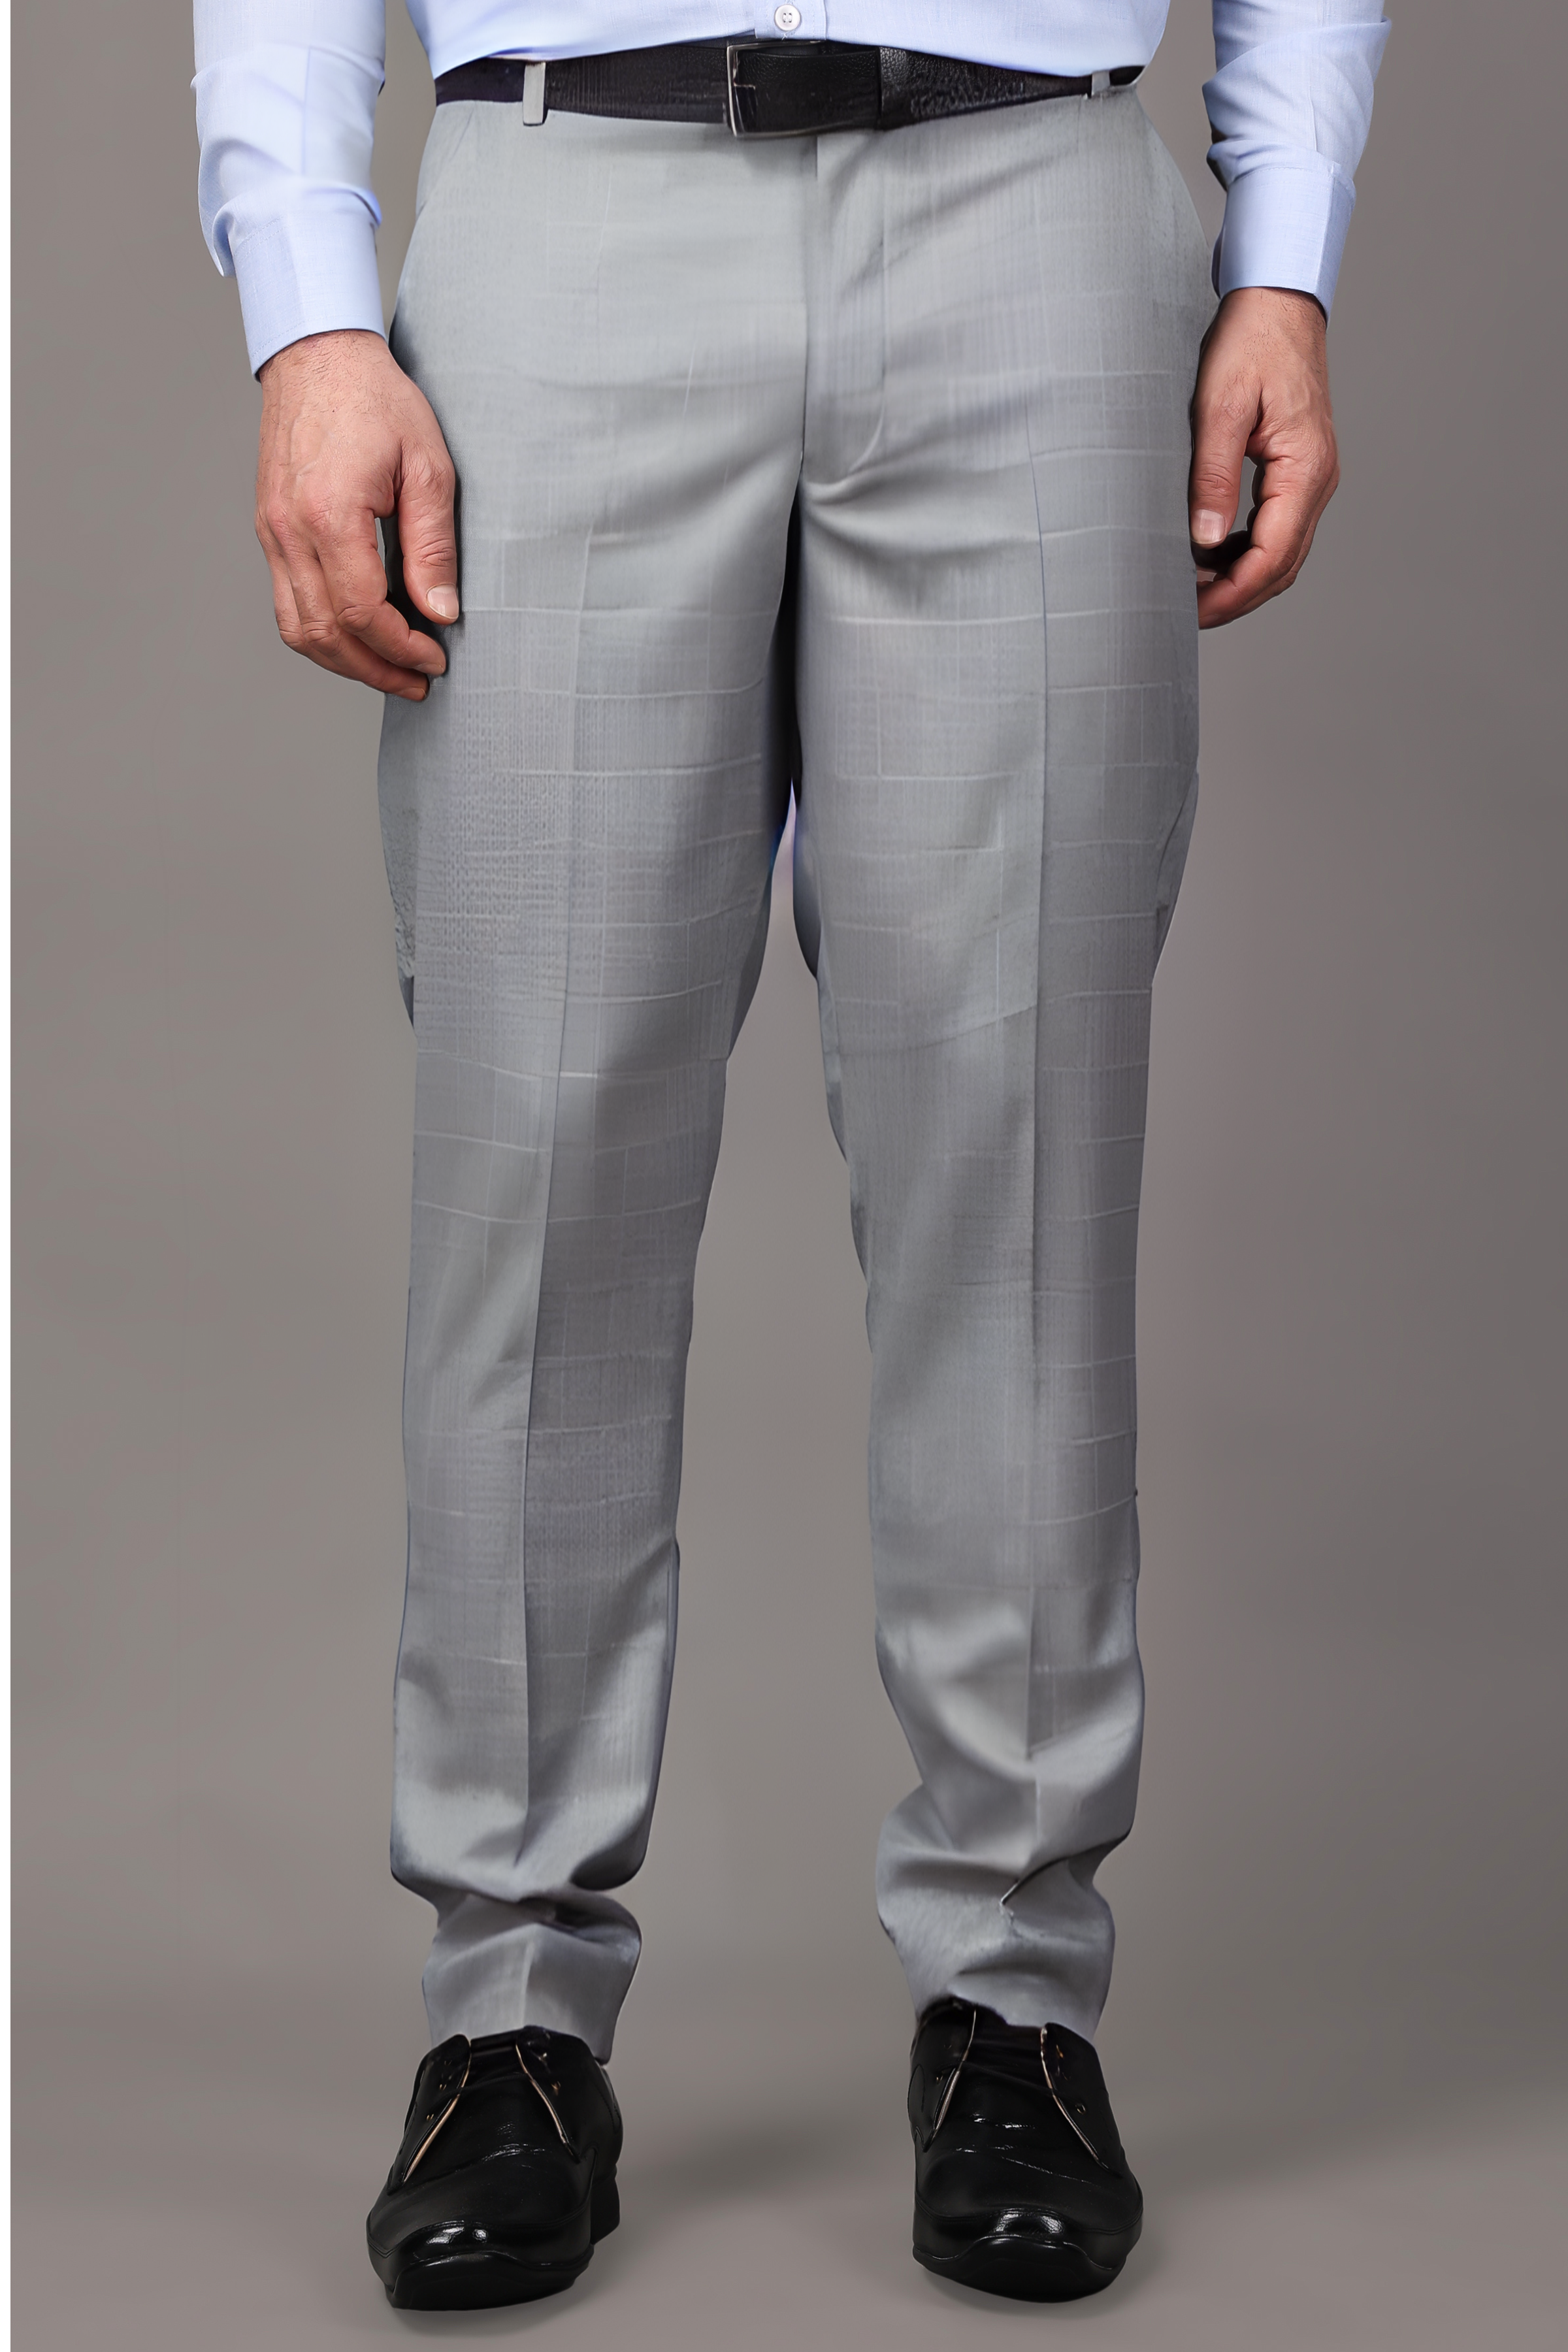 Buy Light Grey Formal Trousers For Mens Online in India